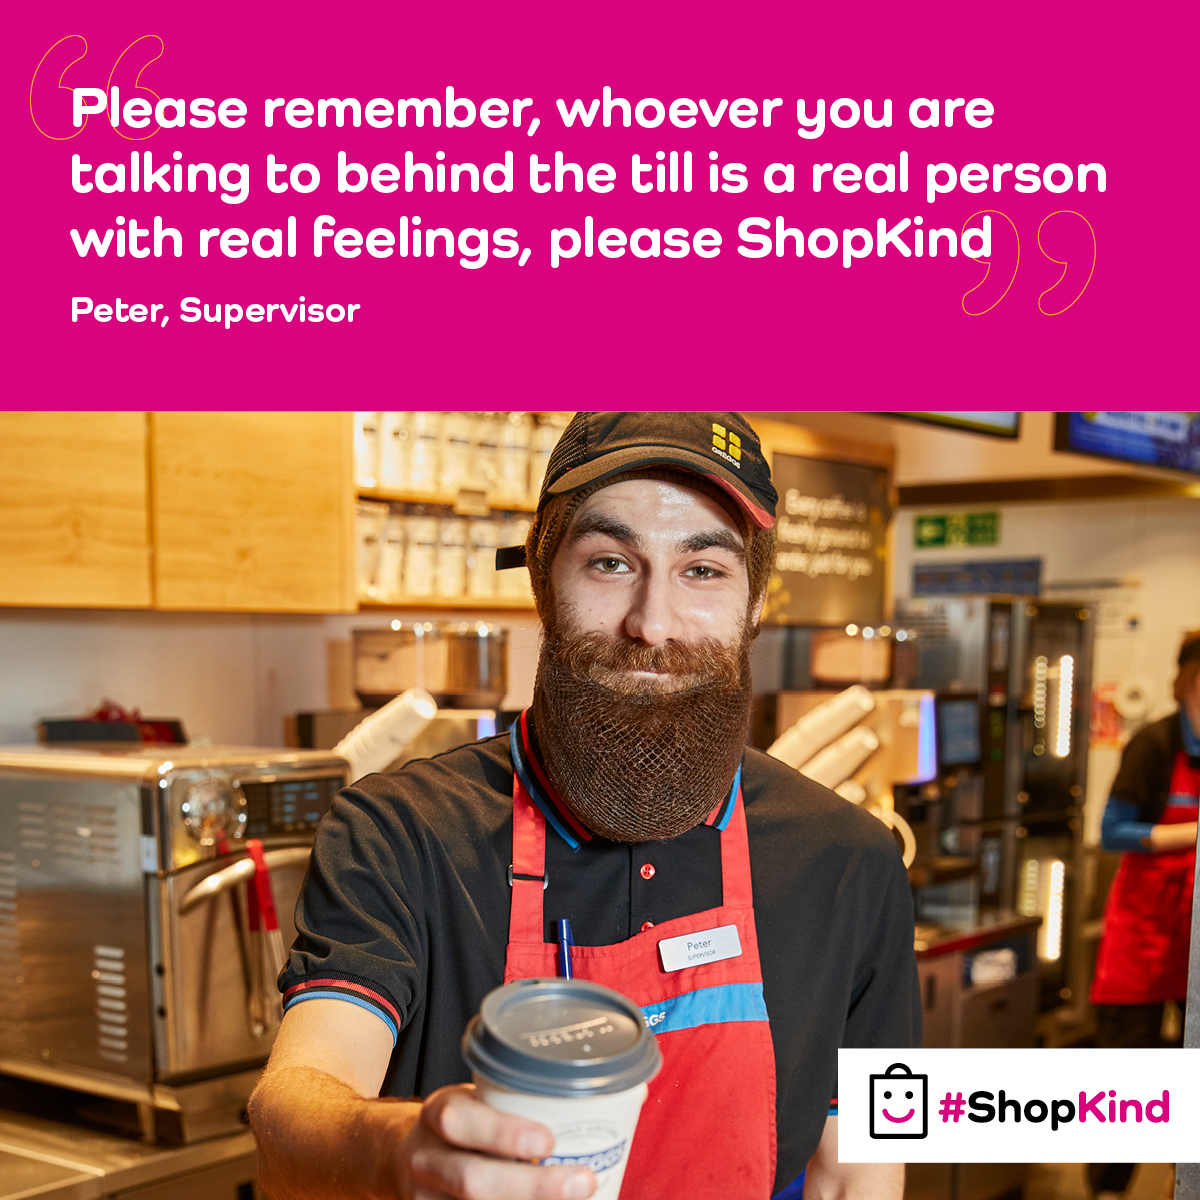 Support shopworkers this #ShopKind Week. 🛍️ This national campaign aims to encourage positive shop behaviours, acknowledge the important role of shopworkers, and raise awareness about violence against them. Find out more 👉charityretail.org.uk/take-part-in-s…